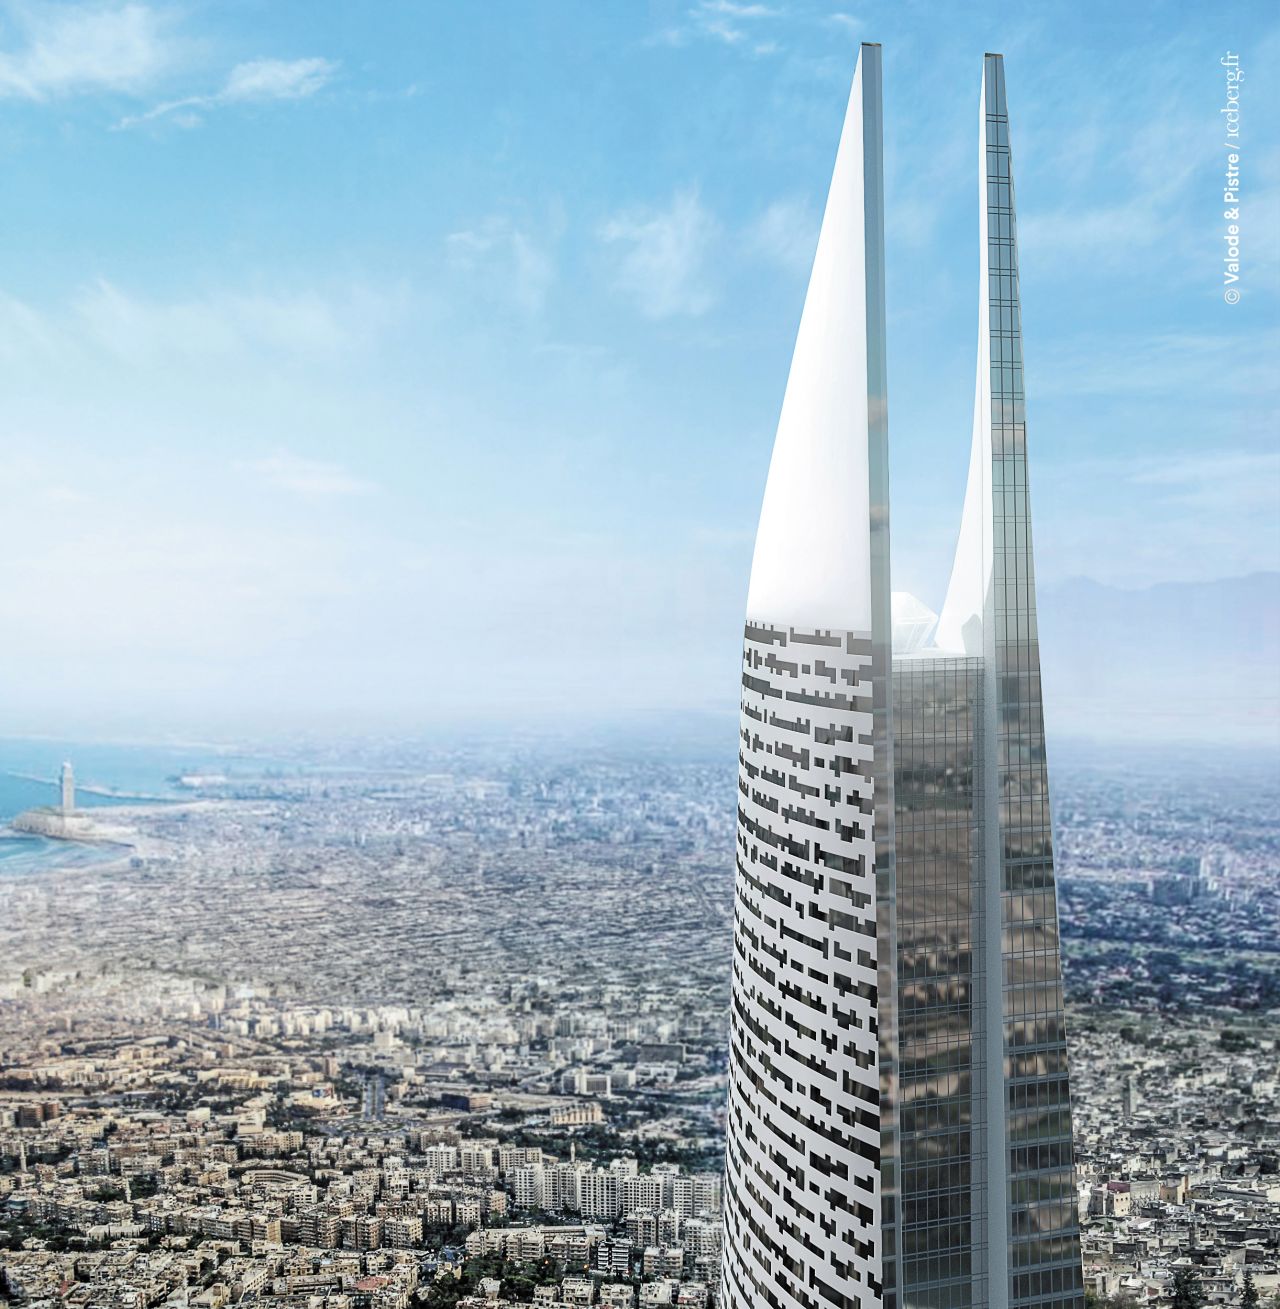 An artist's rendering of the Al Noor Tower with the city of Casablanca depicted in the background.